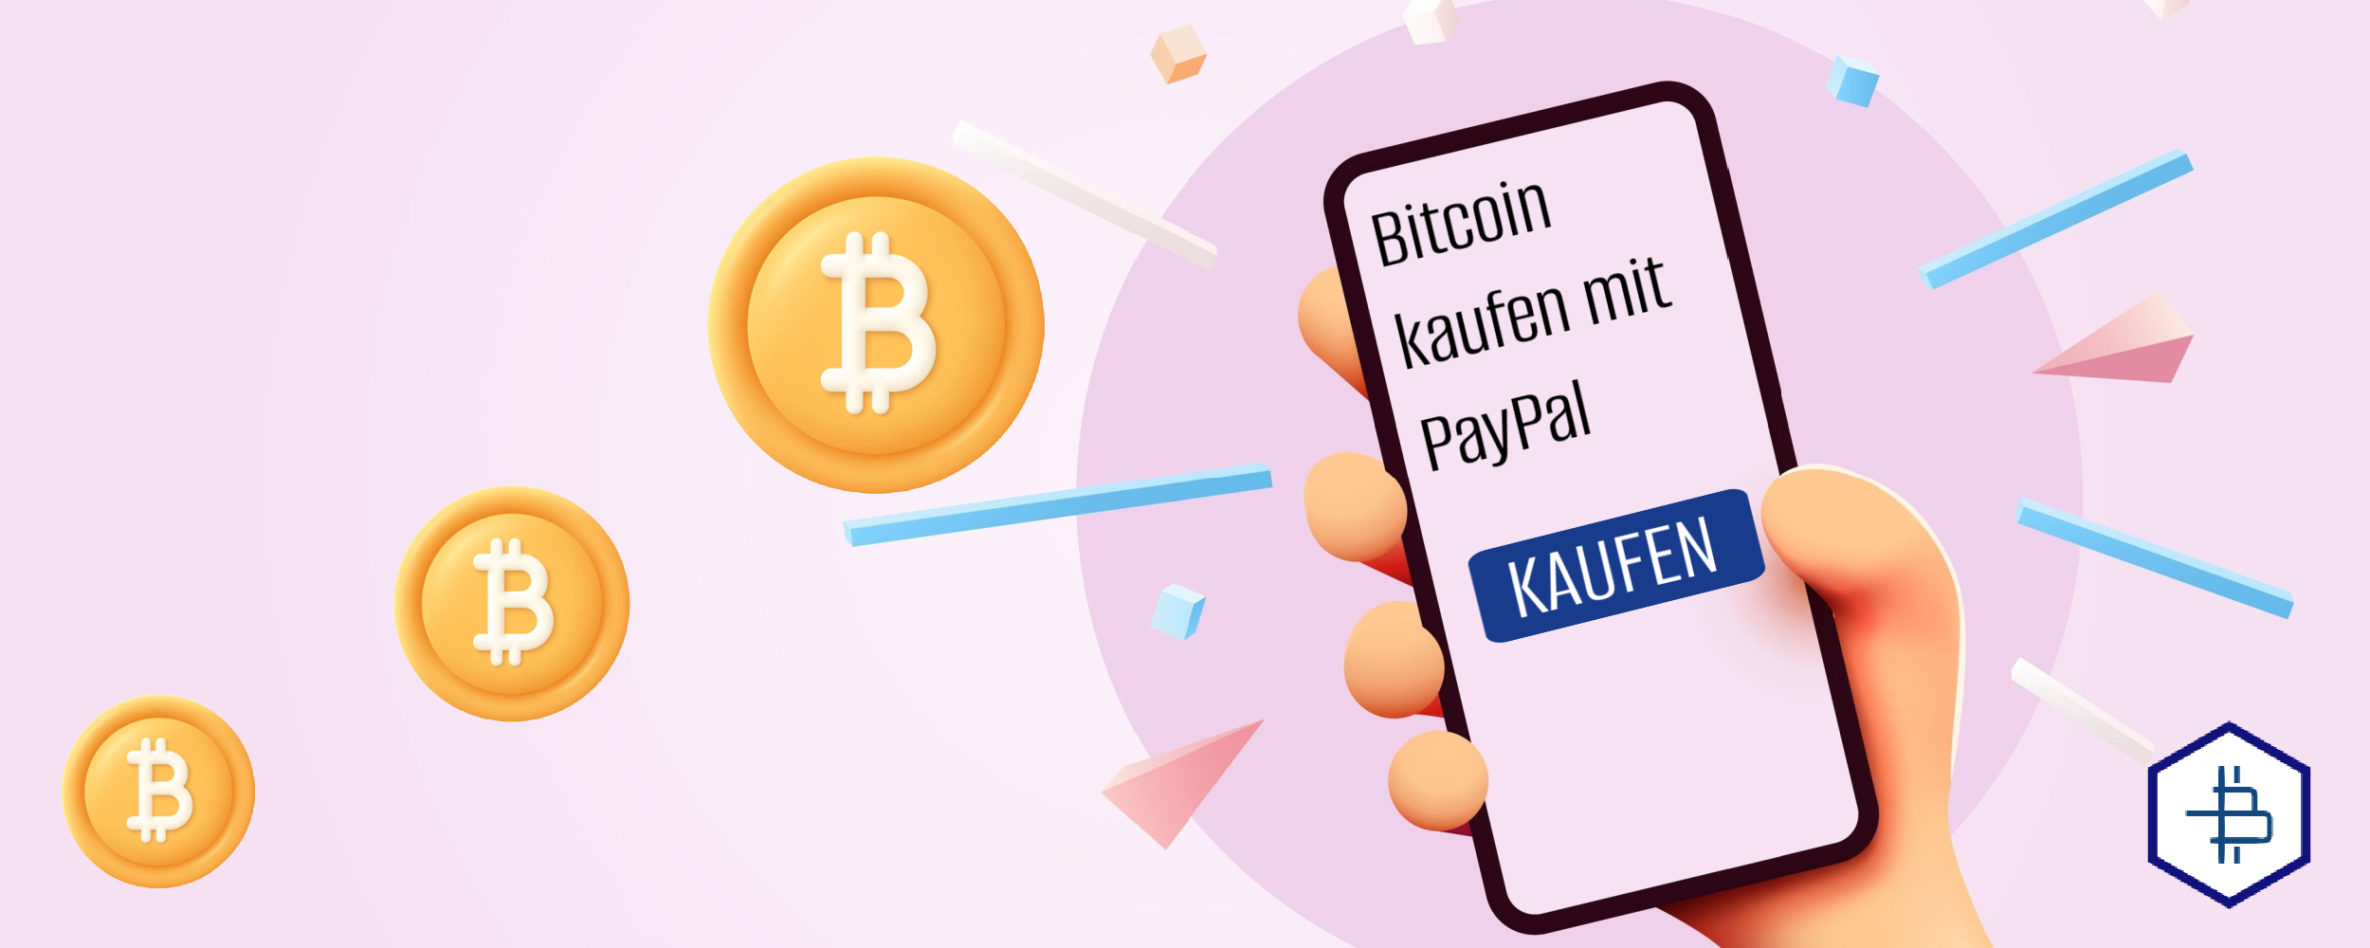 Can You Buy Bitcoin With PayPal? Everything You Need to Know